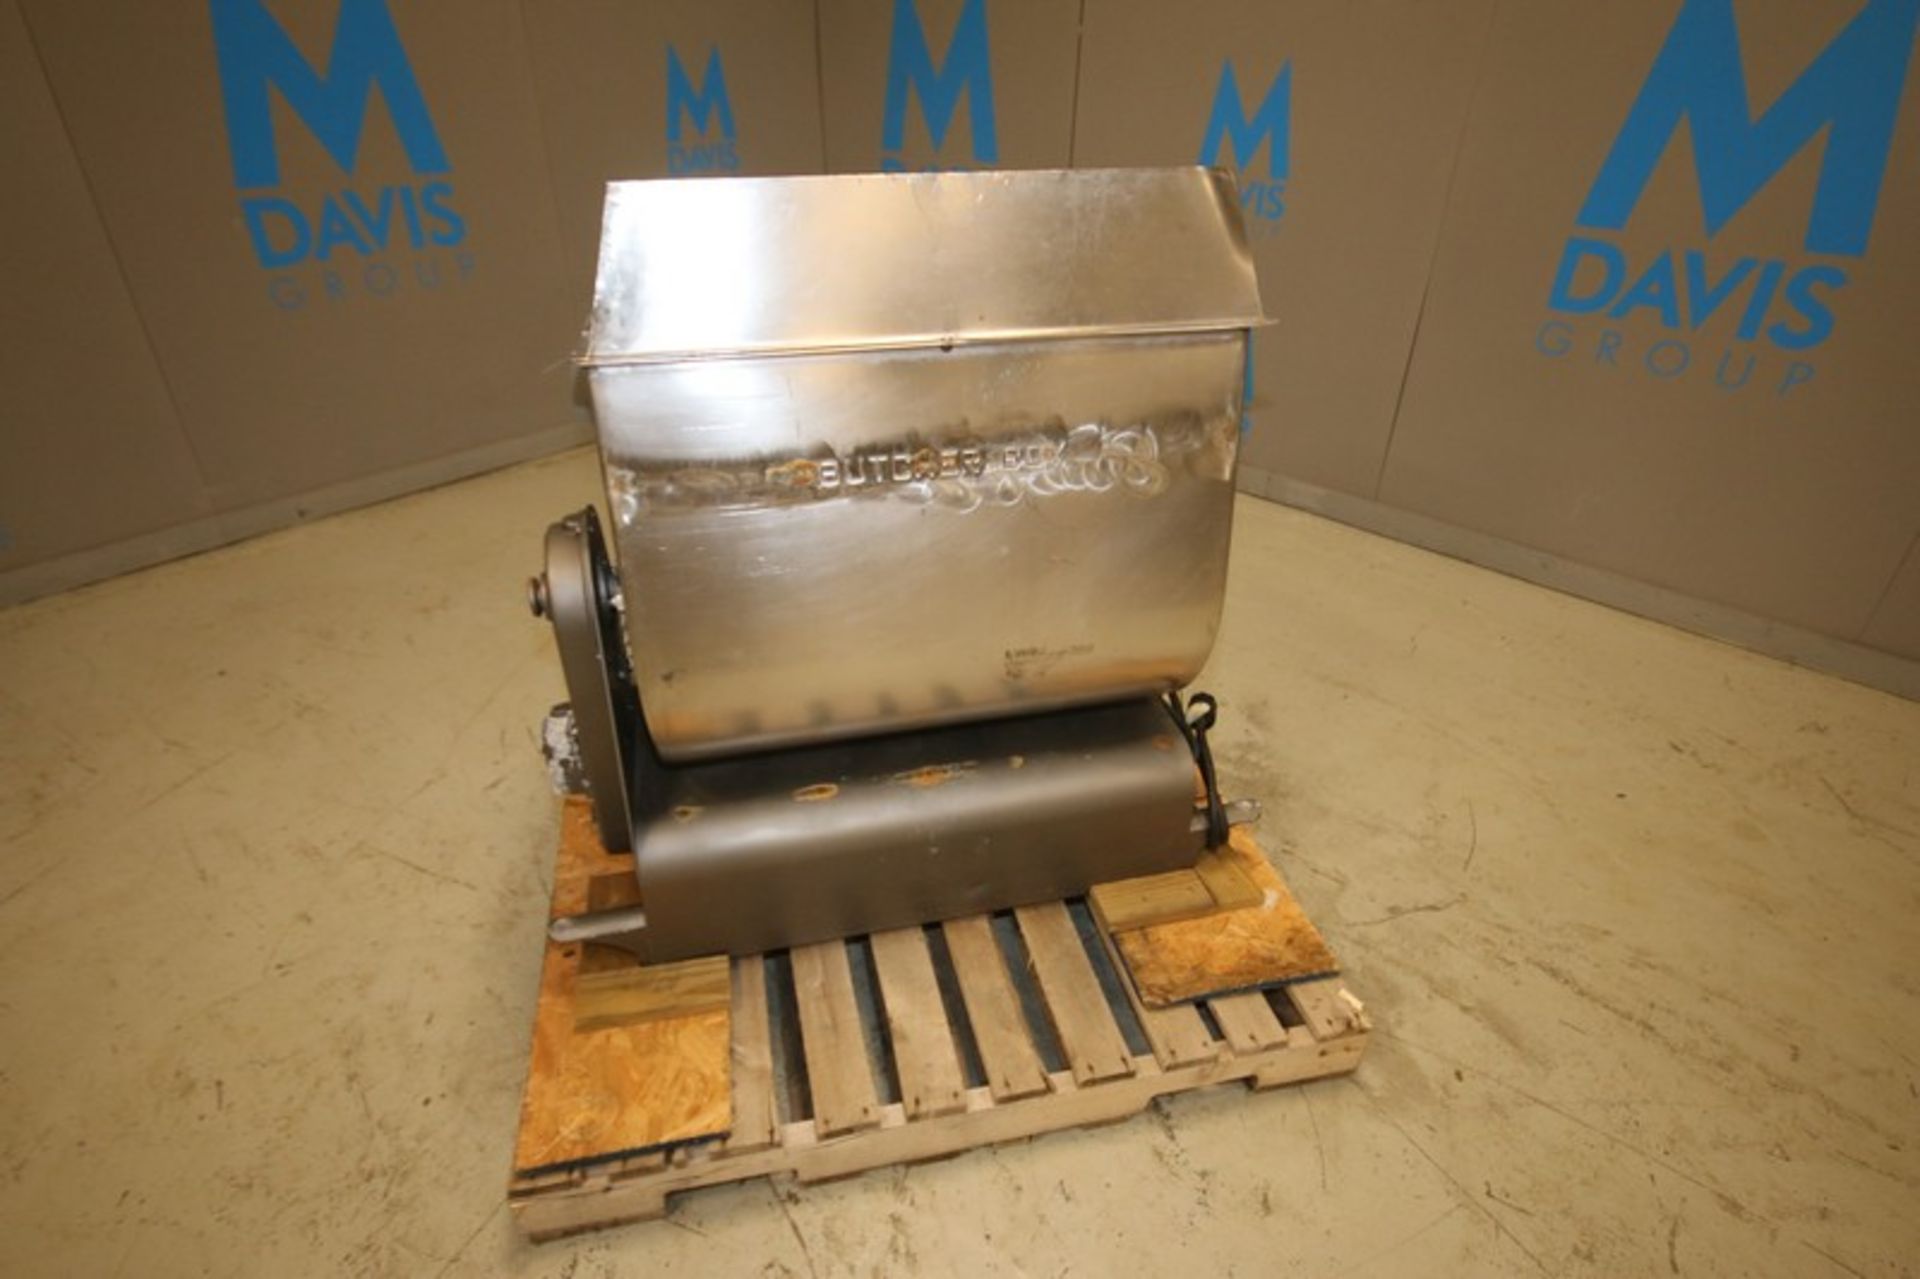 Butcher Boy 31" L x 20" W x 23" D Horizontal S/S Meat Mixer, Possibly Model 150, with Casters, ( - Image 3 of 7